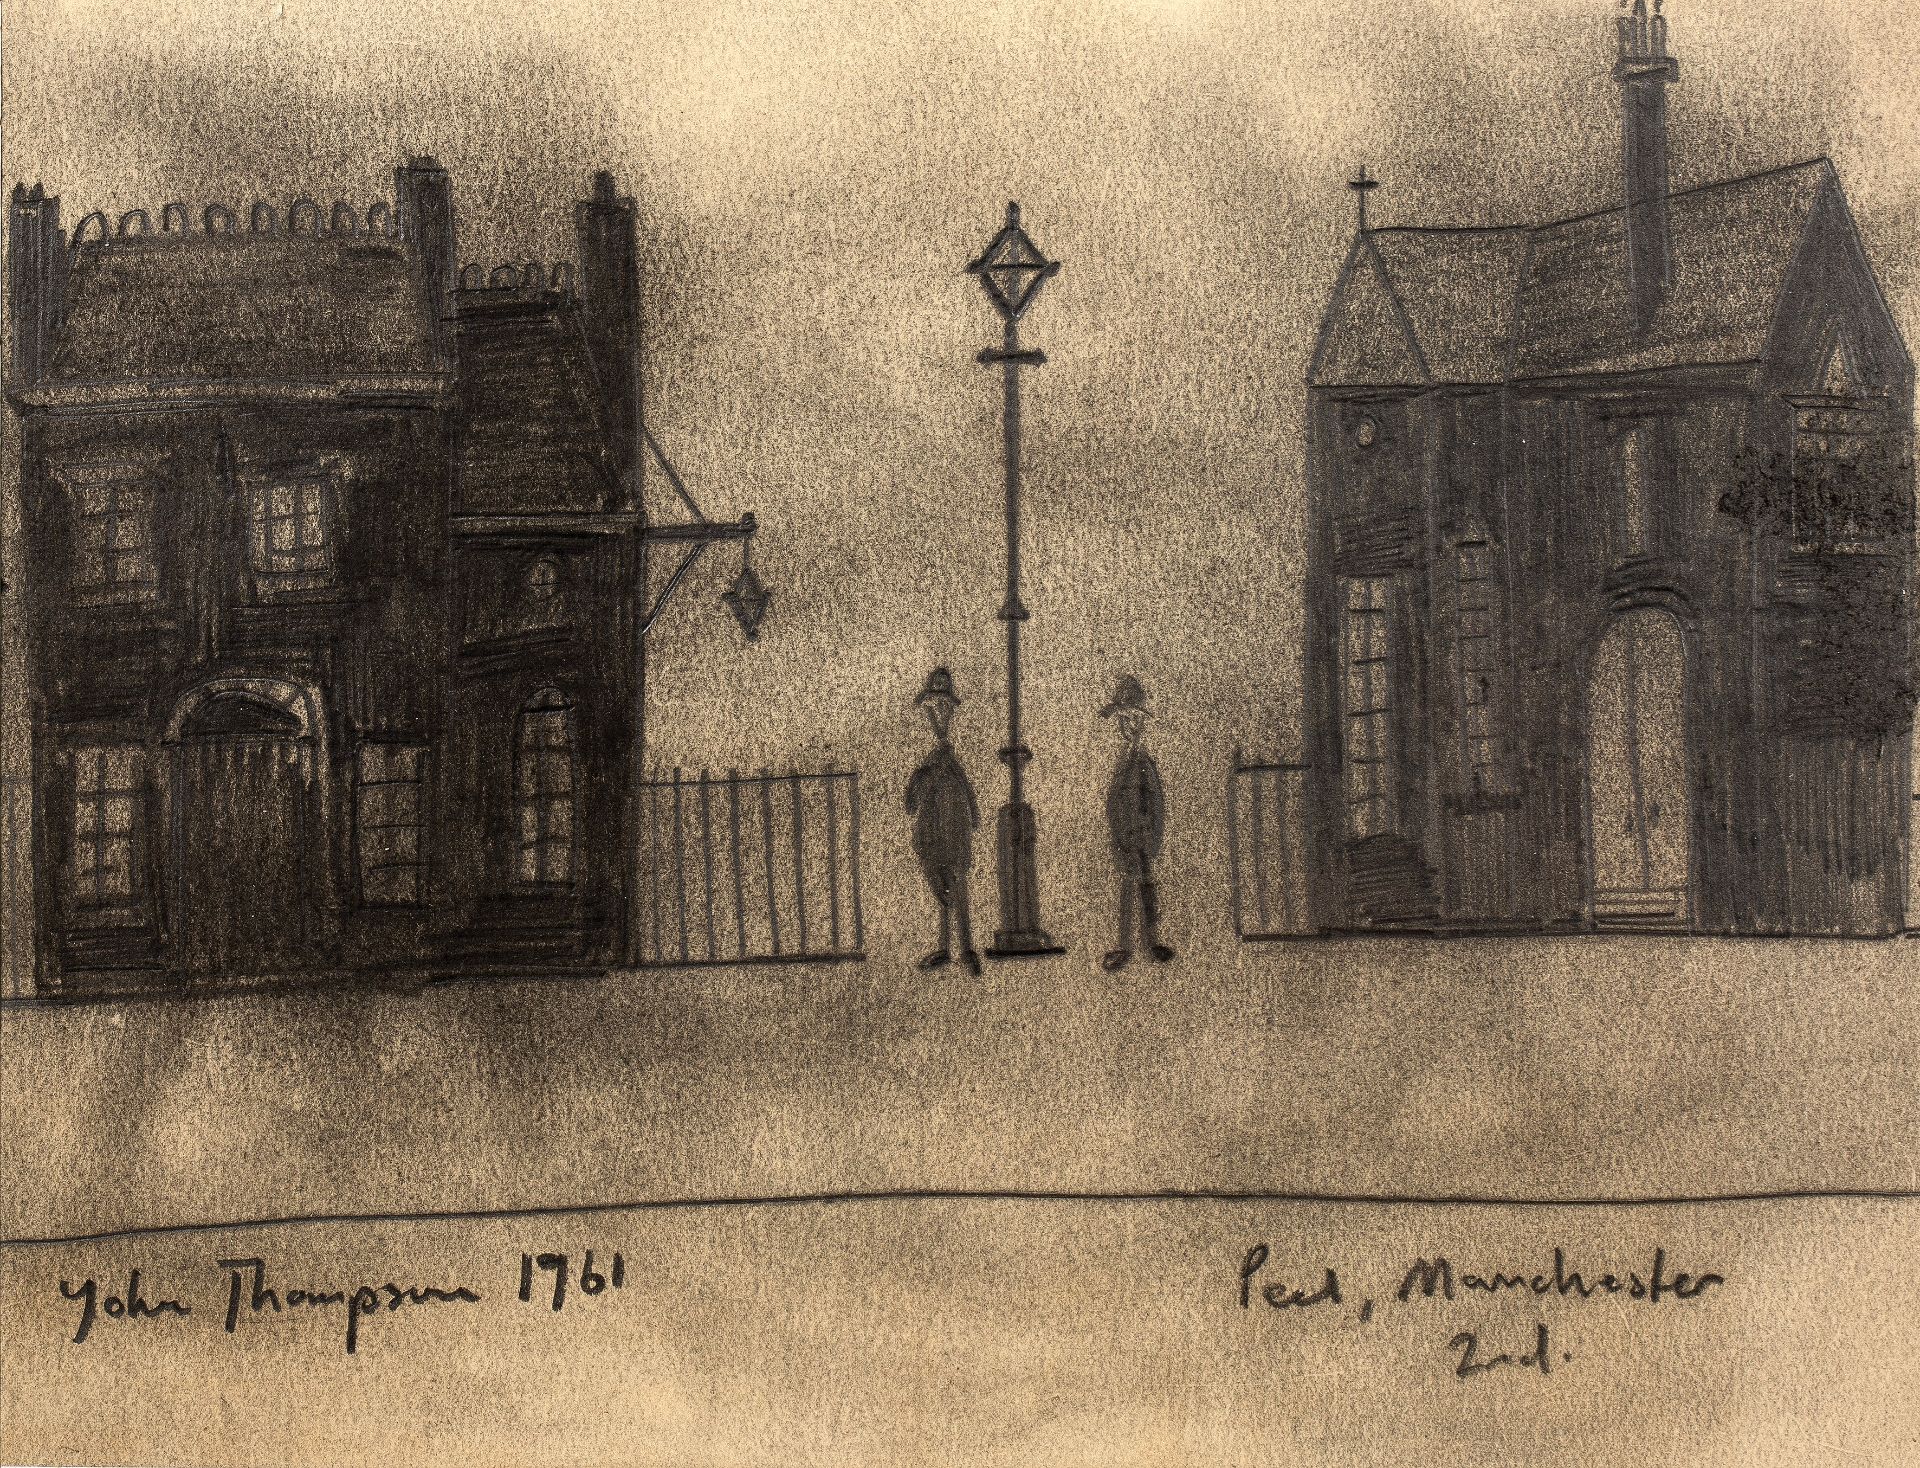 John Thompson (1924-2011) Manchester, 1961 signed, dated, and inscribed (lower) charcoal 23 x 30cm.